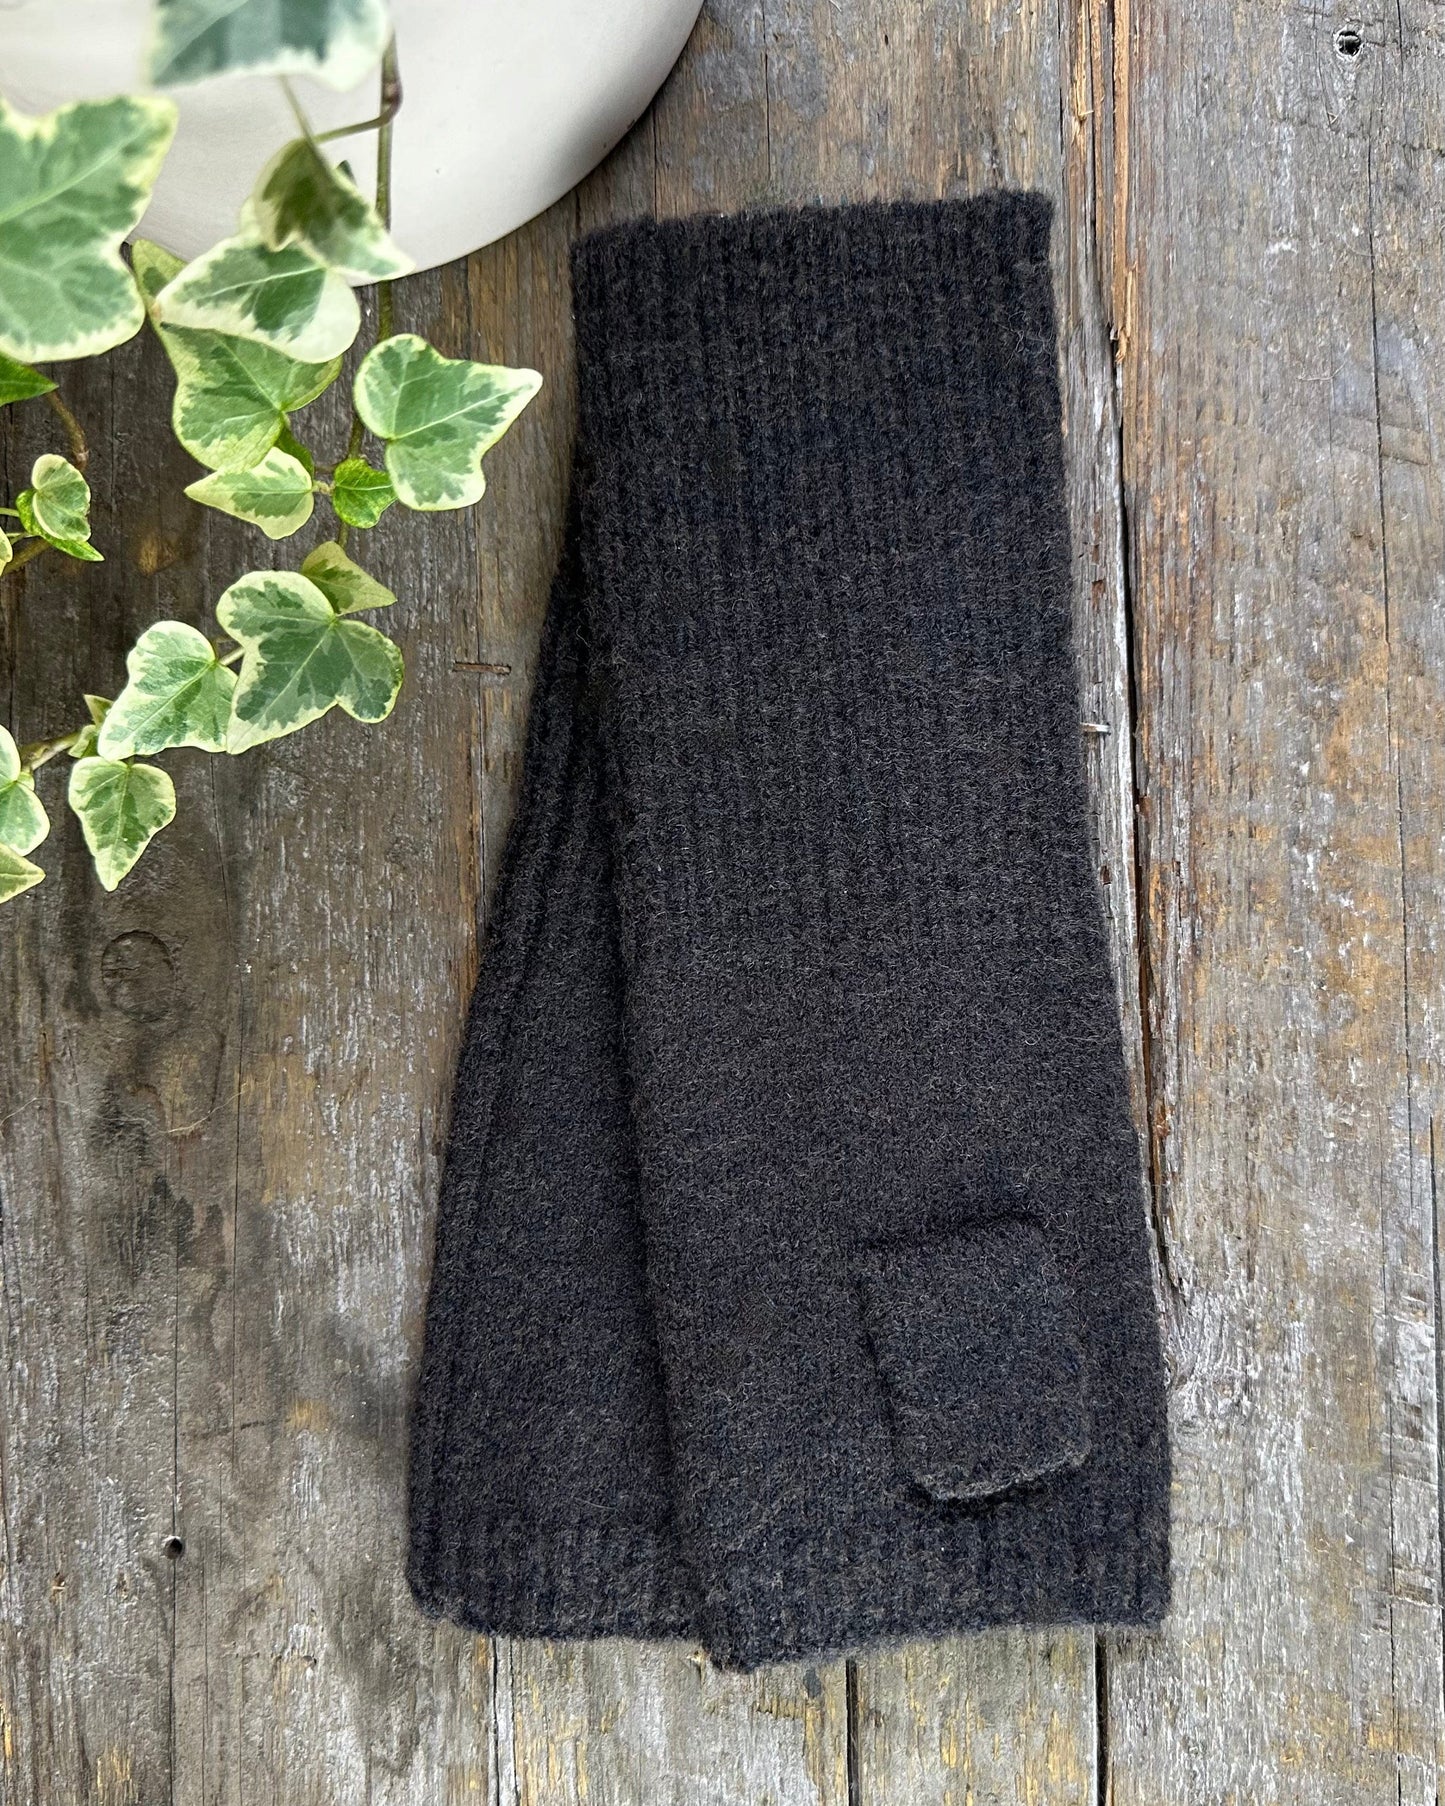 Gloves Knitted Wrist Warmers - Black